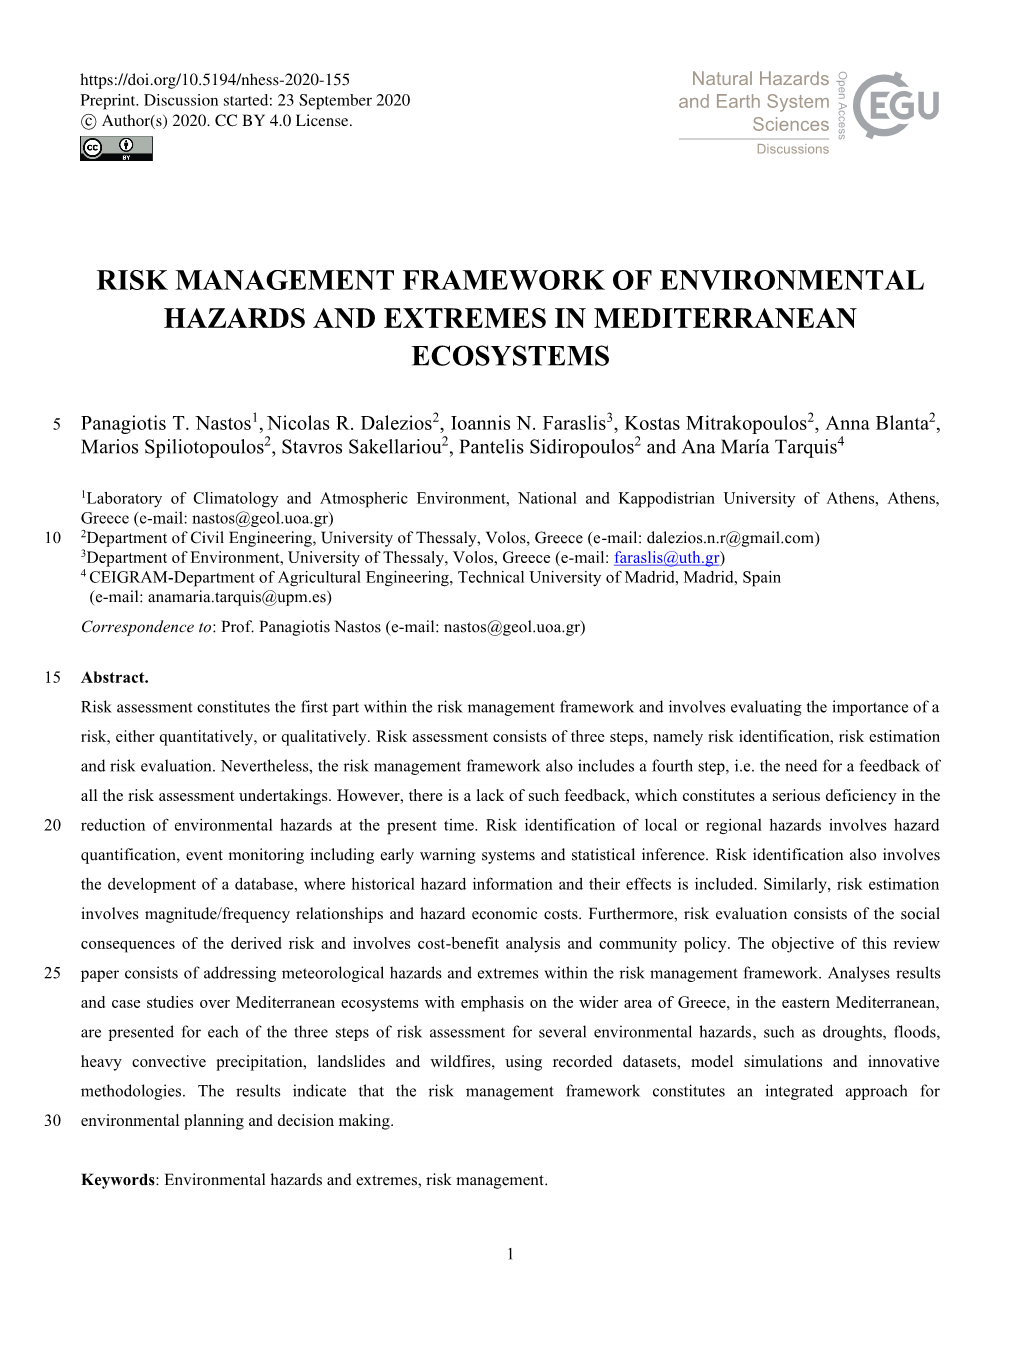 Risk Management Framework of Environmental Hazards and Extremes in Mediterranean Ecosystems